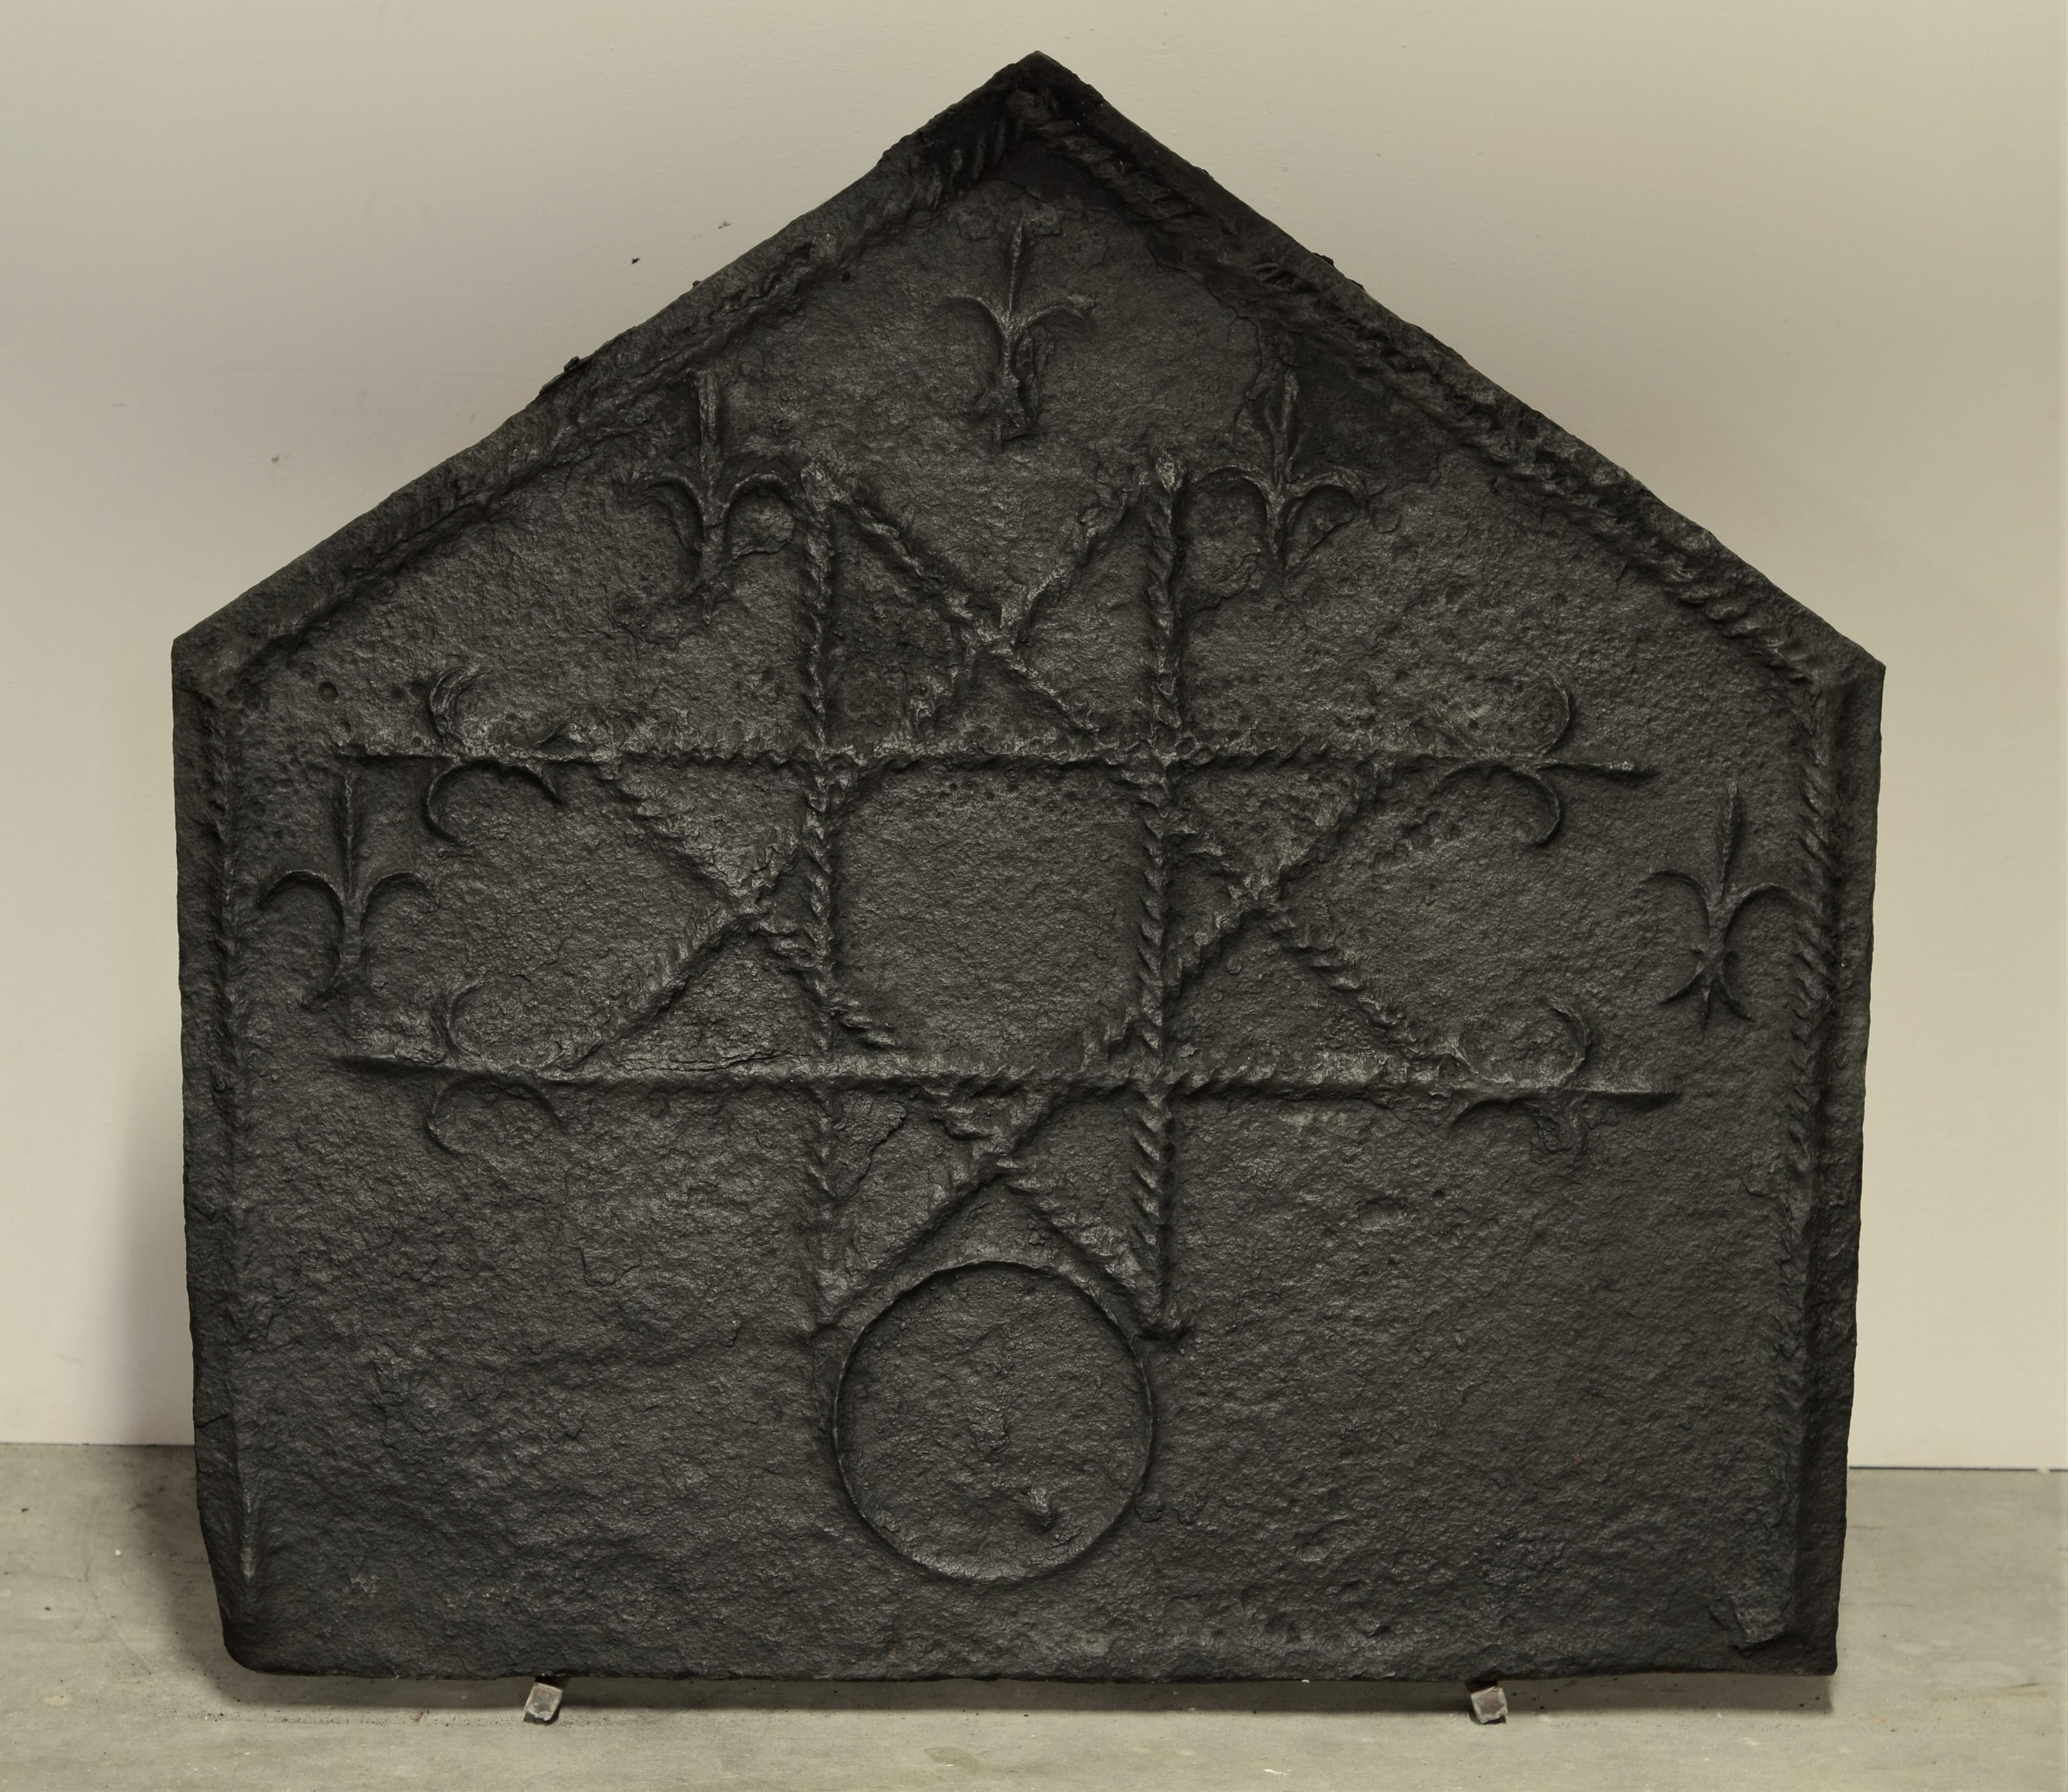 Very nice, great looking French antique fireback.

This cast iron fireback with its tapered shape, Fleur de Lis and star and cirkel decoration is a beautiful piece that combines the finesse of the twisted rope decorations and the powerful gothic